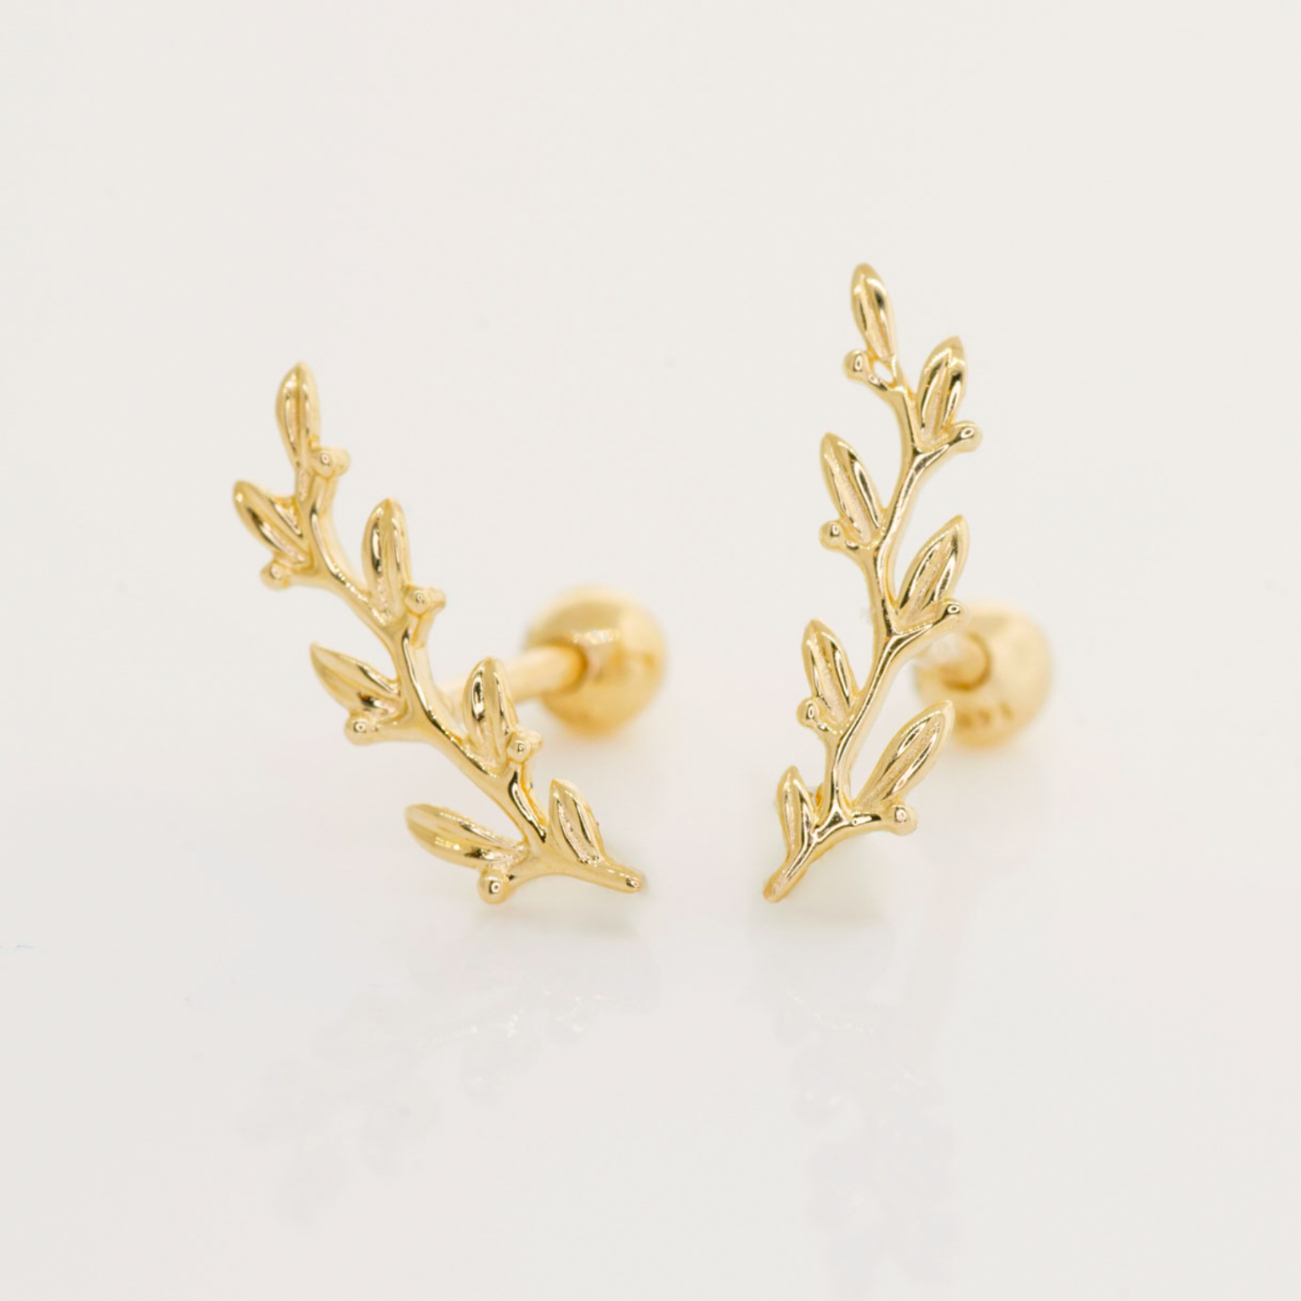 14k Solid Gold Curved Leaf Shaped Stud Piercing Earring - Anygolds